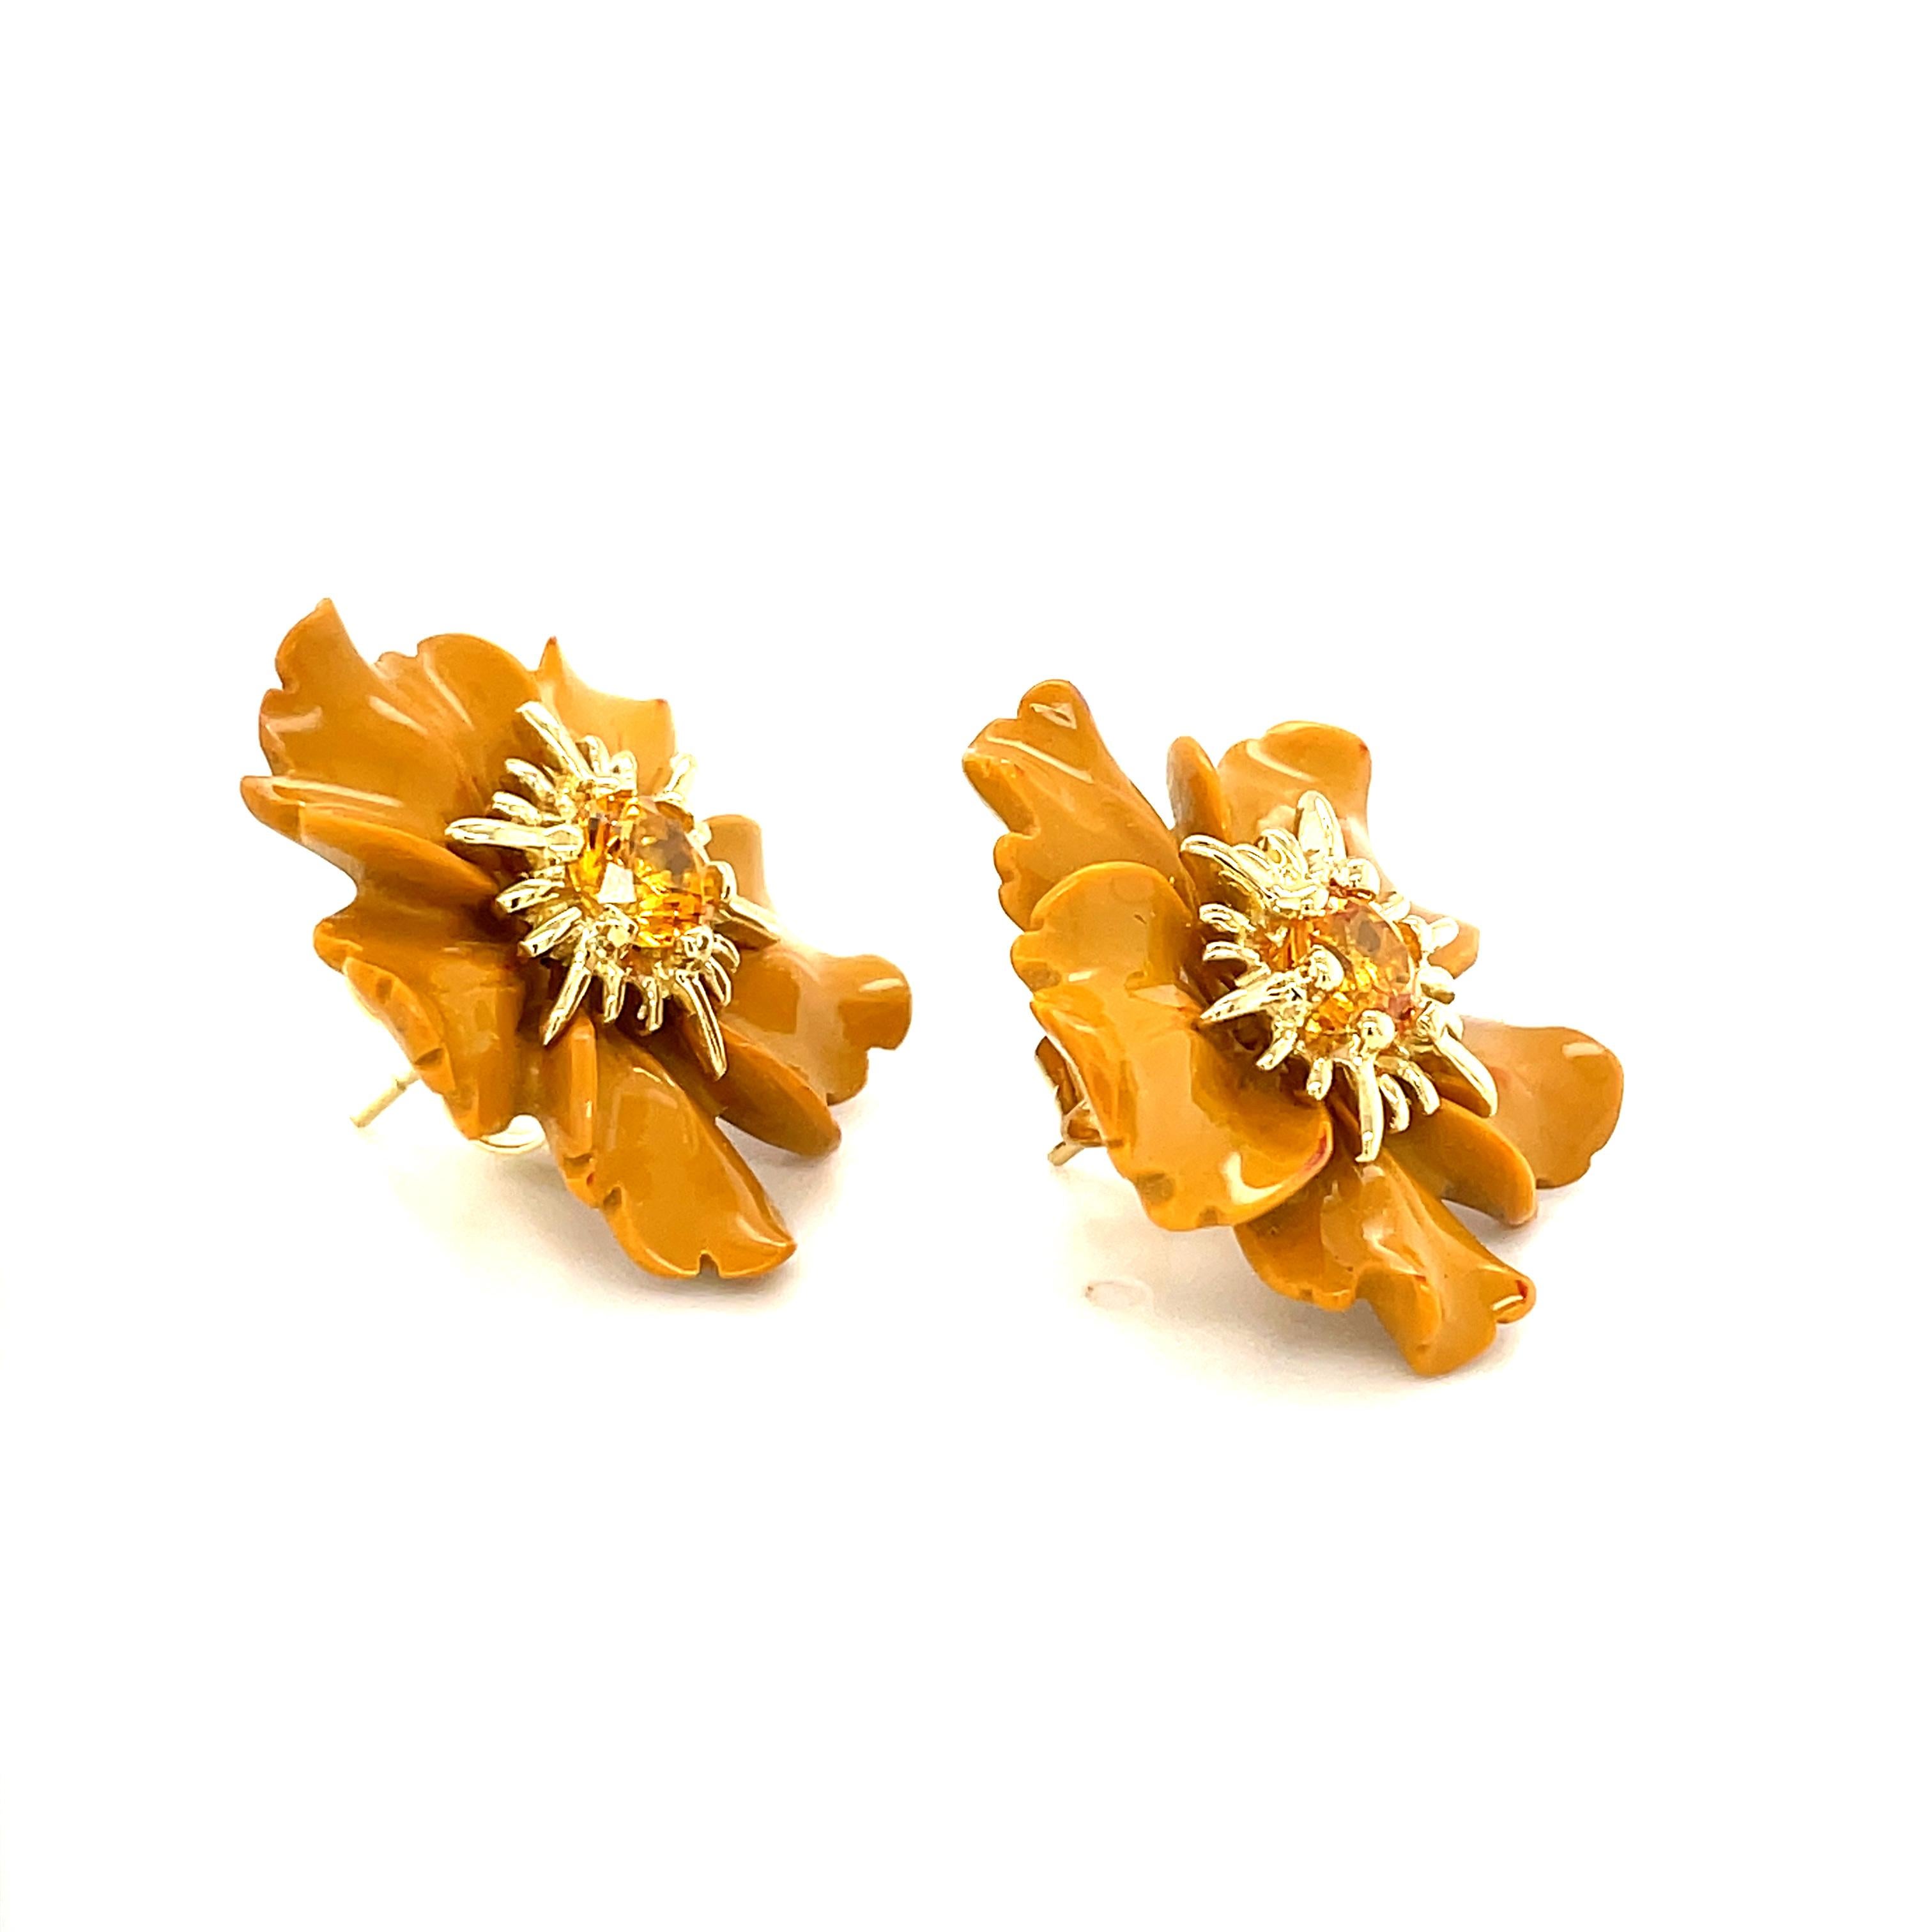 Carved Jasper Flower Earring Jacket with Yellow Sapphire and Gold Stamen Posts For Sale 1